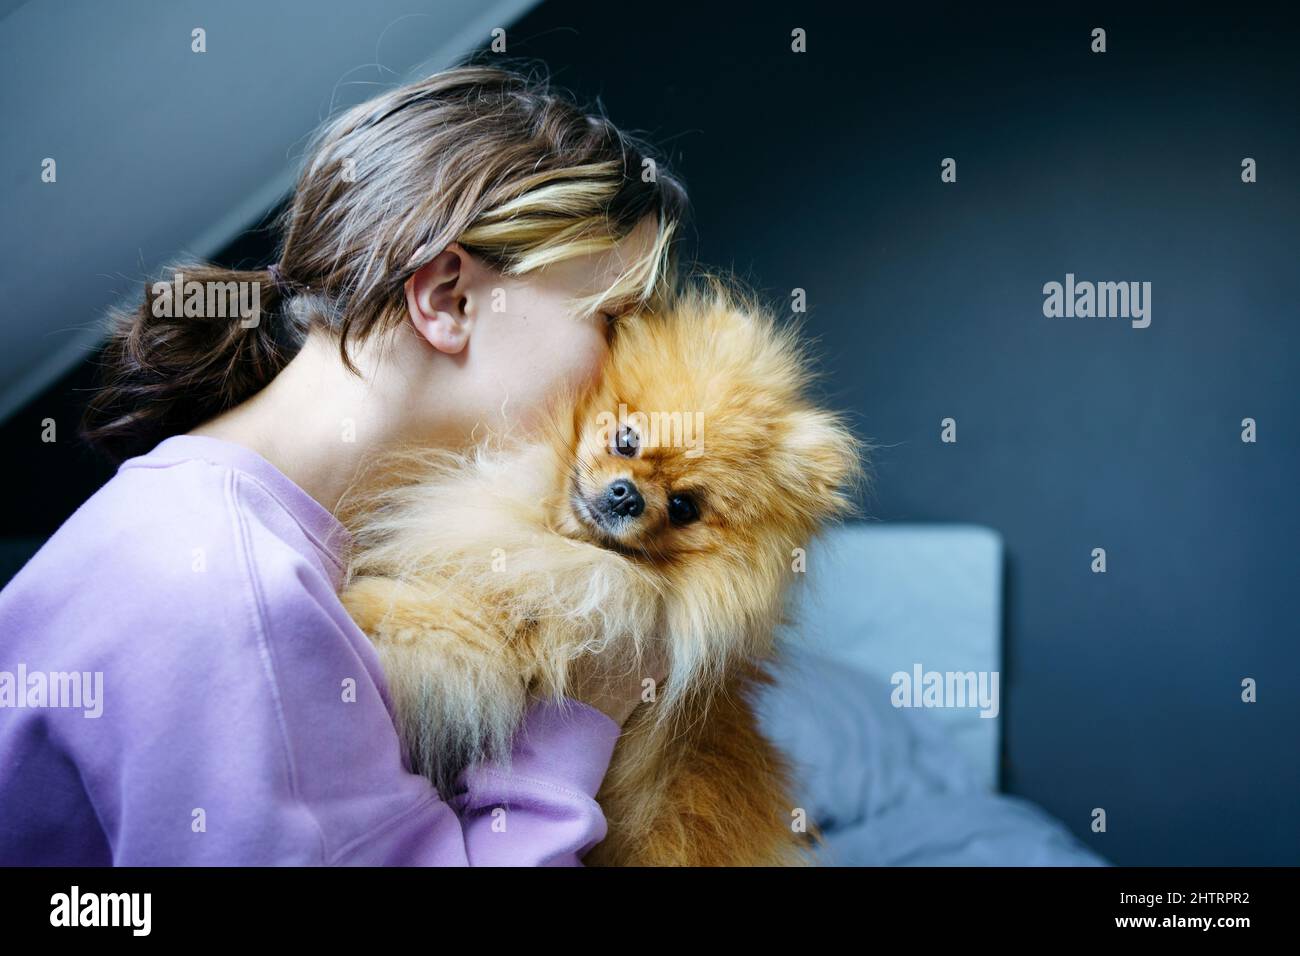 Owner teen girl taking care of their pets, feeding, grooming, play with dog Stock Photo